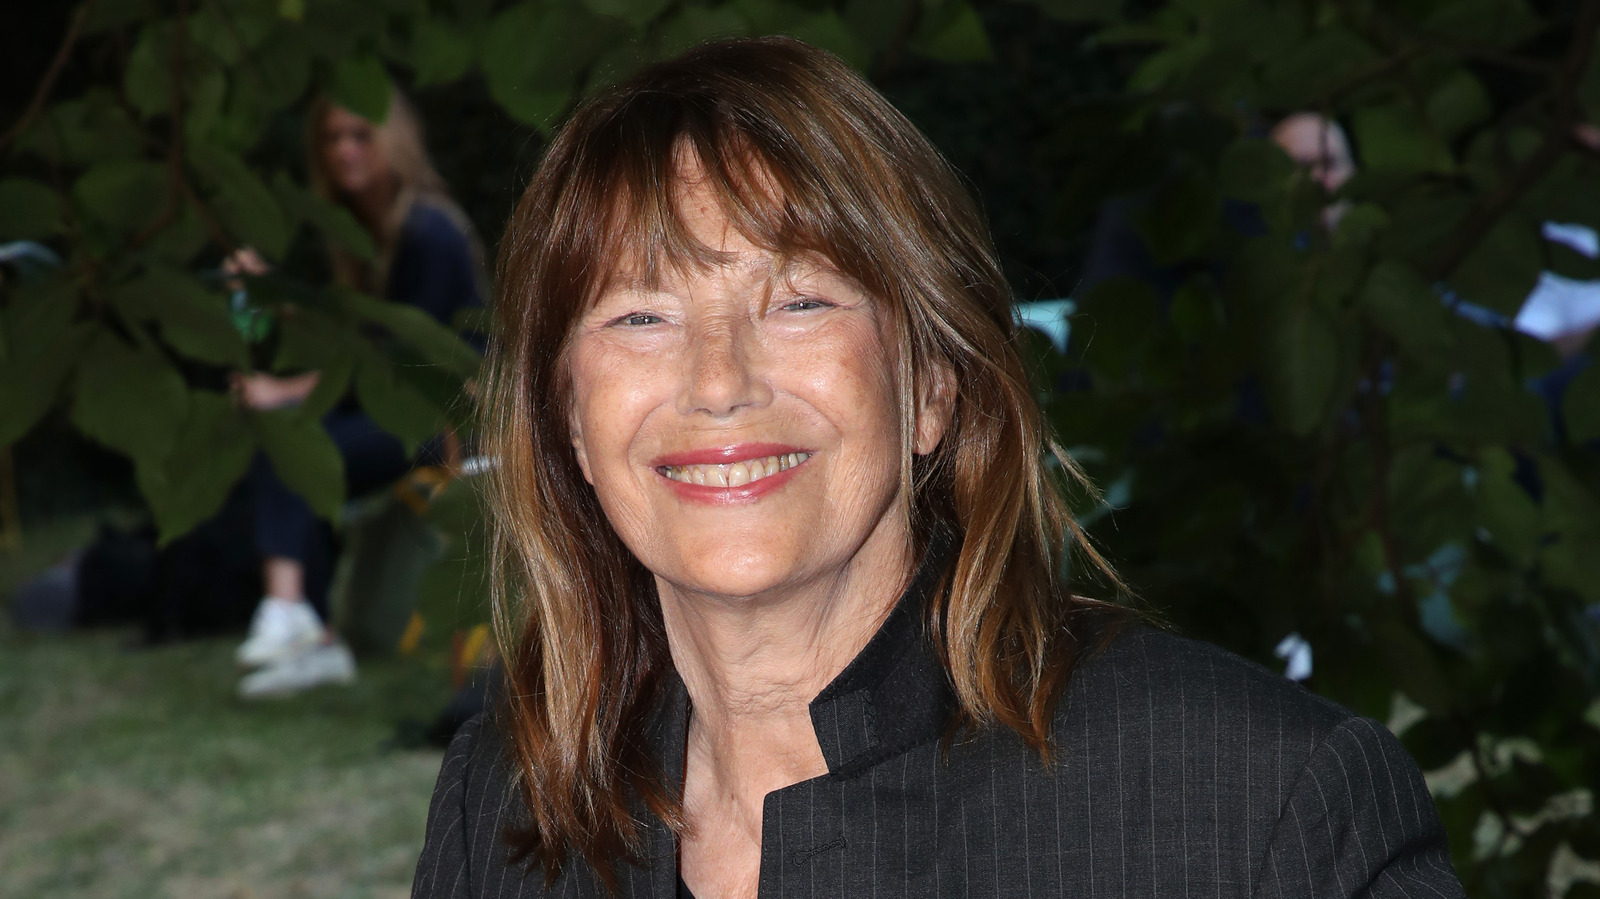 Kate Barry, Daughter of Je T'aime Singer Jane Birkin and Film